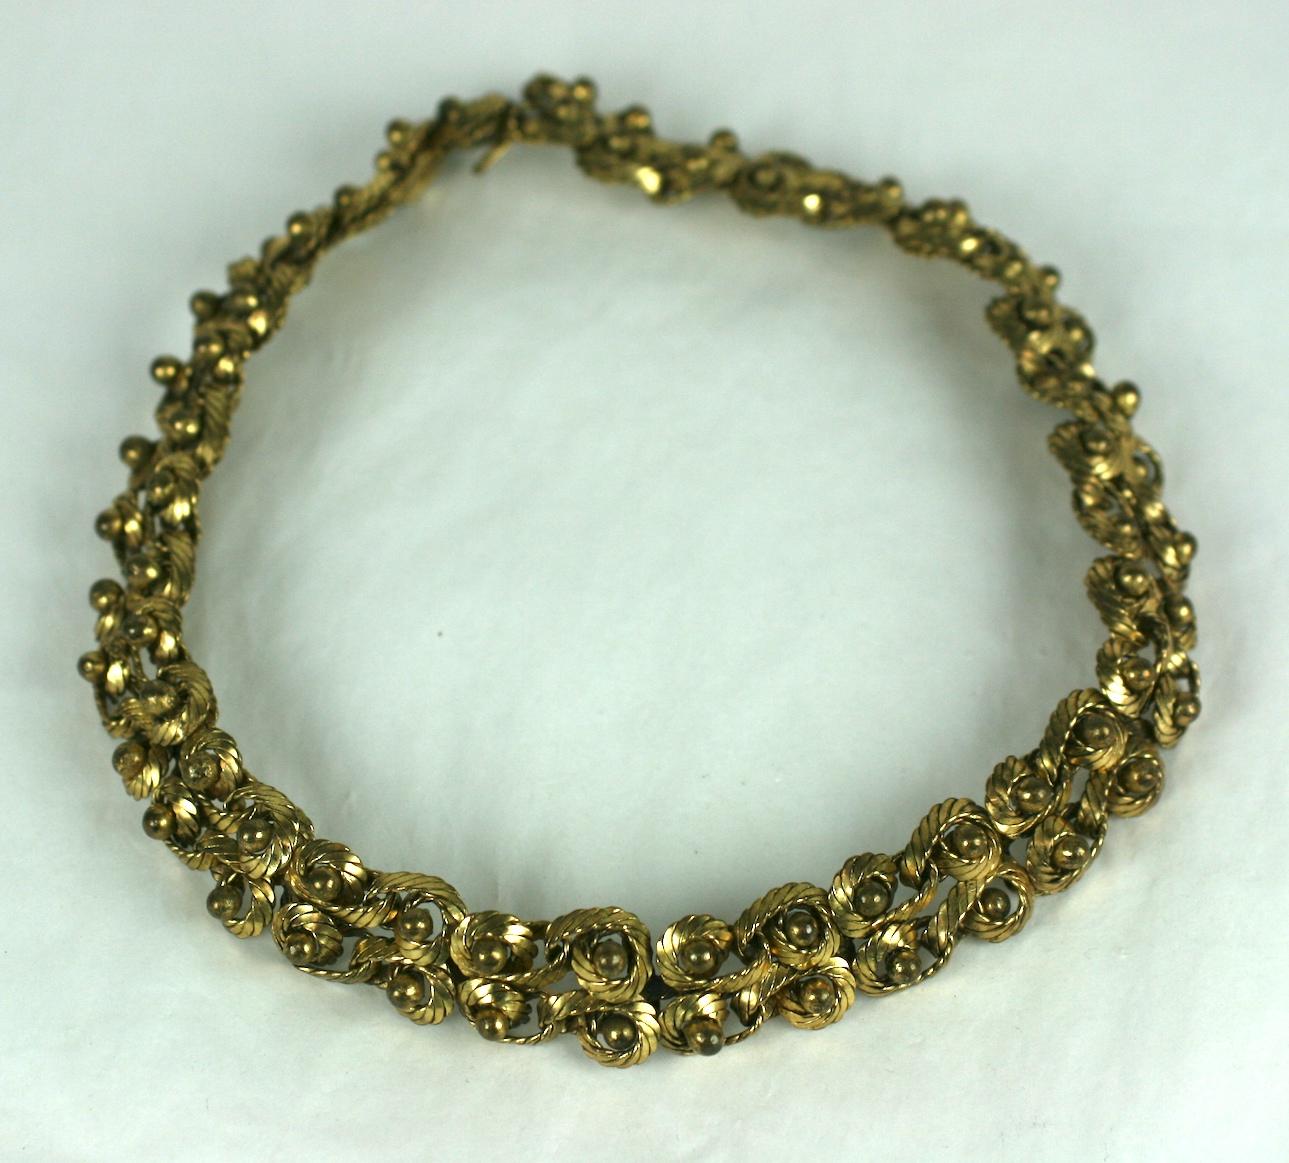 Unusual French Modernist twisted coil upon coil intricate woven necklace. There are four rows of gold plated textured metal wire with the center of each coil having a tiny hand applied gilt ball. France 1950's. Handmade.
Excellent Condition.
Length